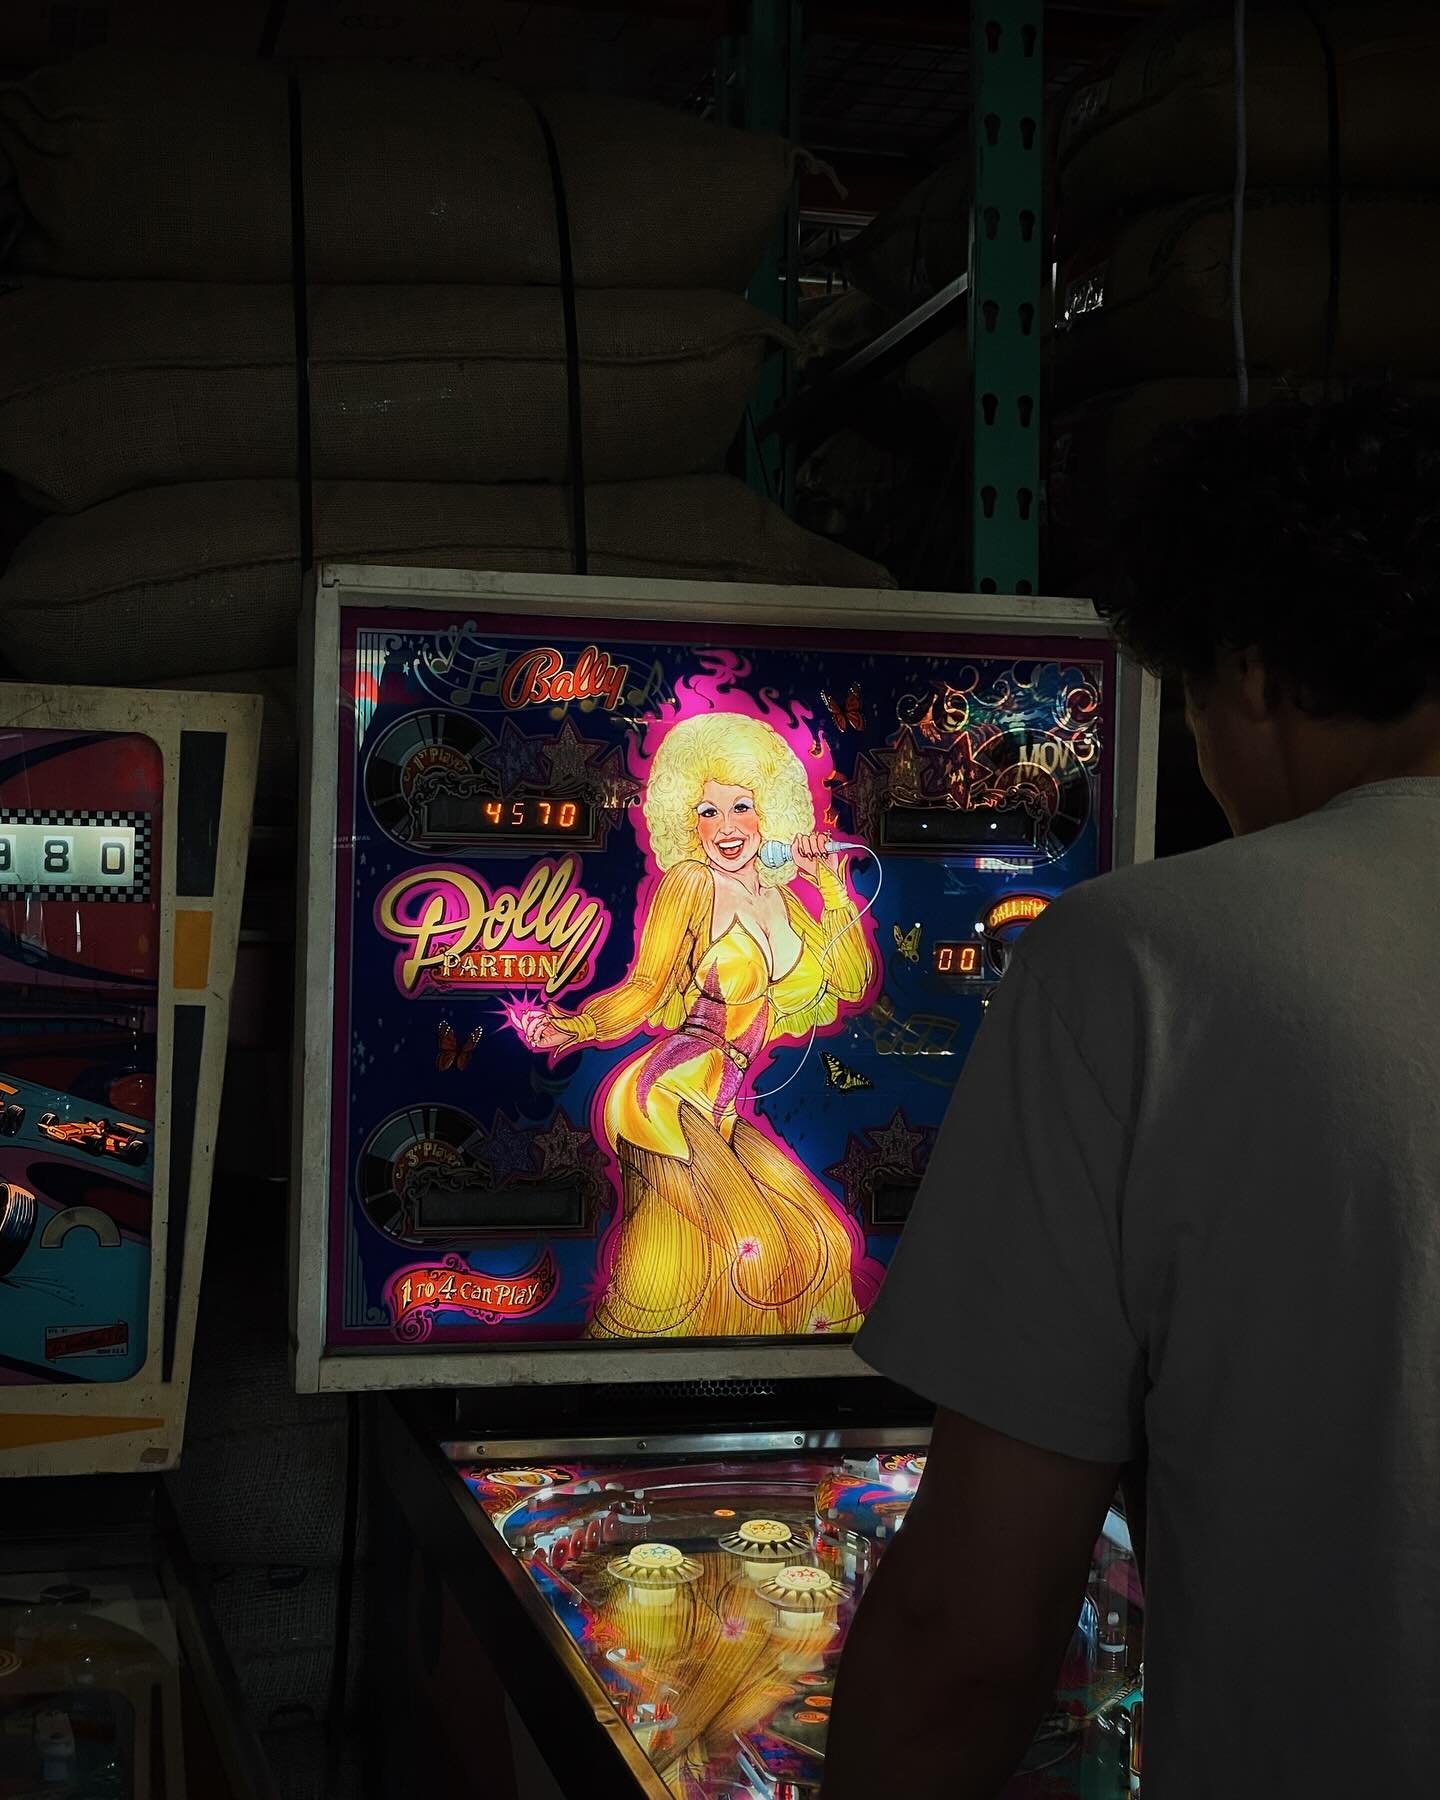 Back home to the same ol&rsquo; same ol&rsquo;
Stop on in this week and check out some great coffee&rsquo;s and new pinball machines! ☕️🪩😎

#dollyparton #dollypartonpinball #dollywood #whatsbrewingsatx #latteart #baristagram